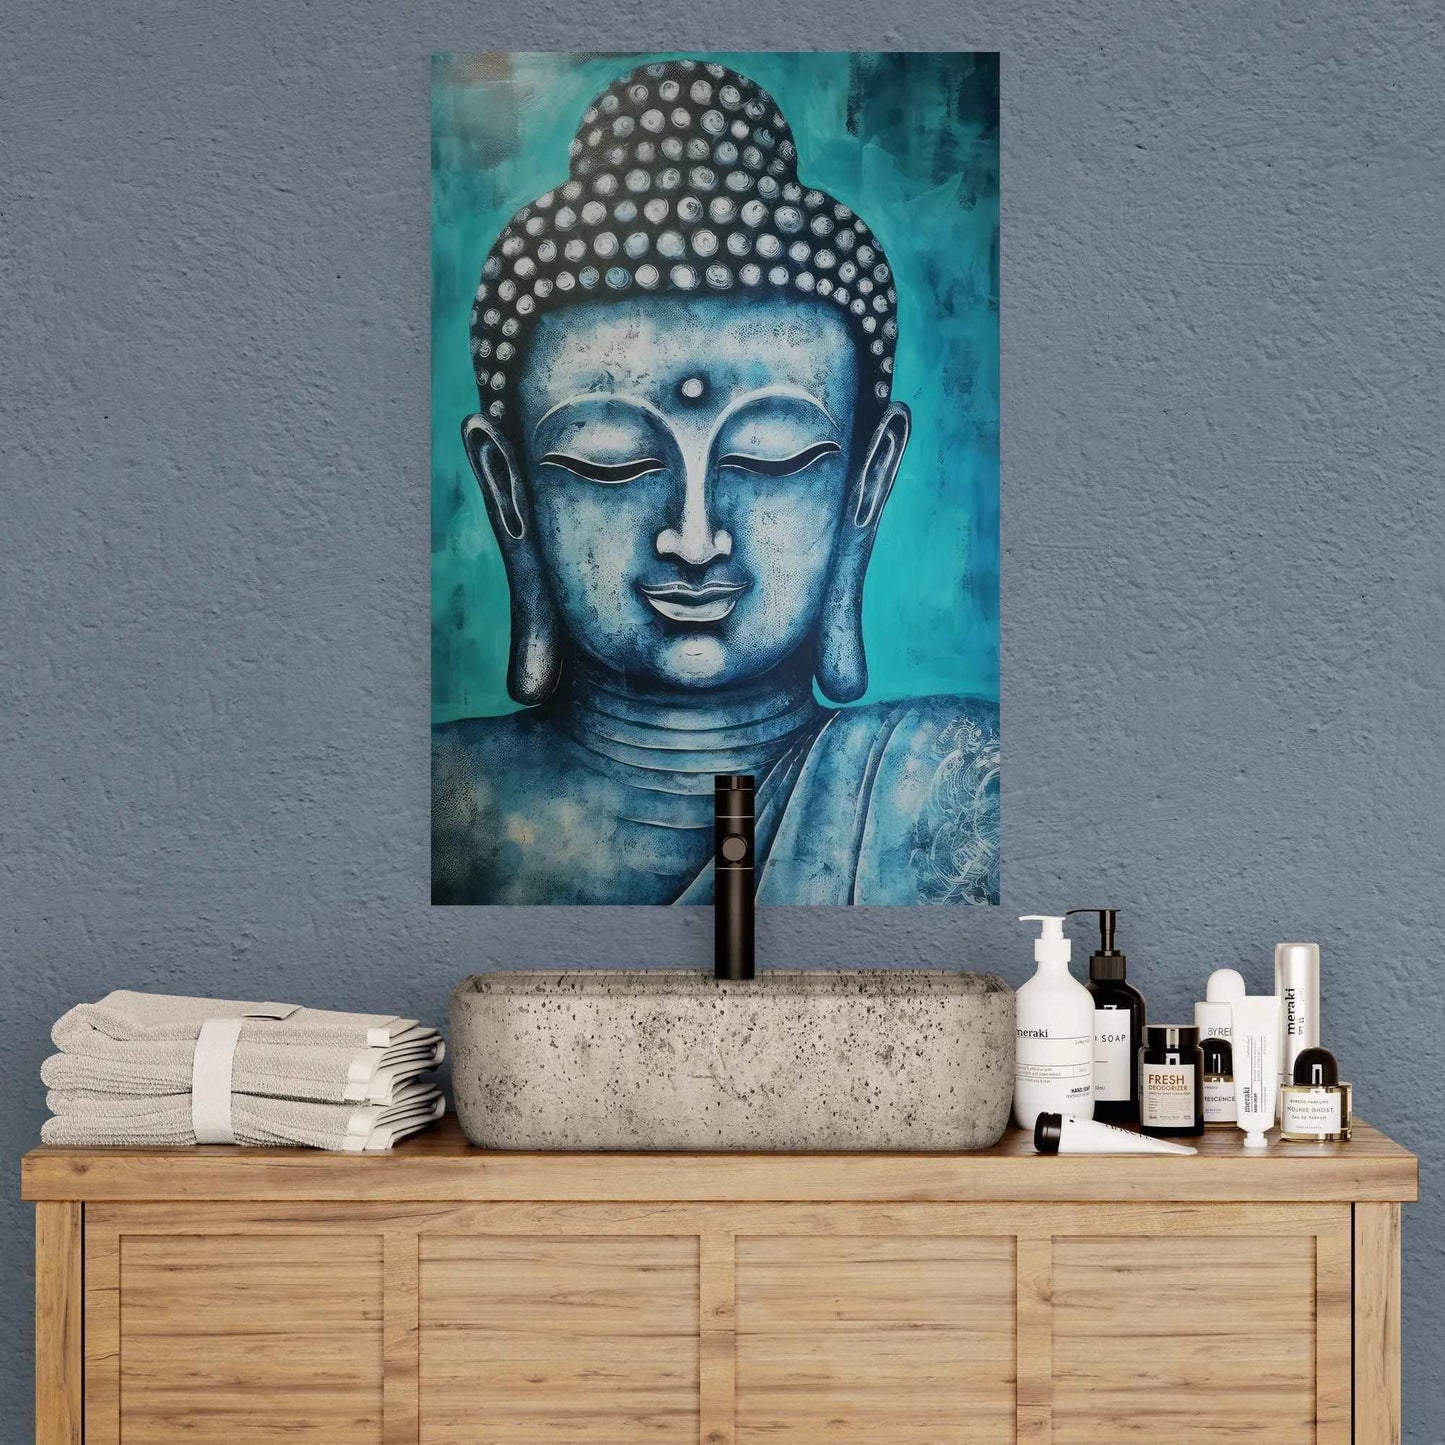 Sophisticated bathroom featuring a stone basin on a wooden vanity with neatly folded towels and toiletries, under a blue and gold Buddha head painting.